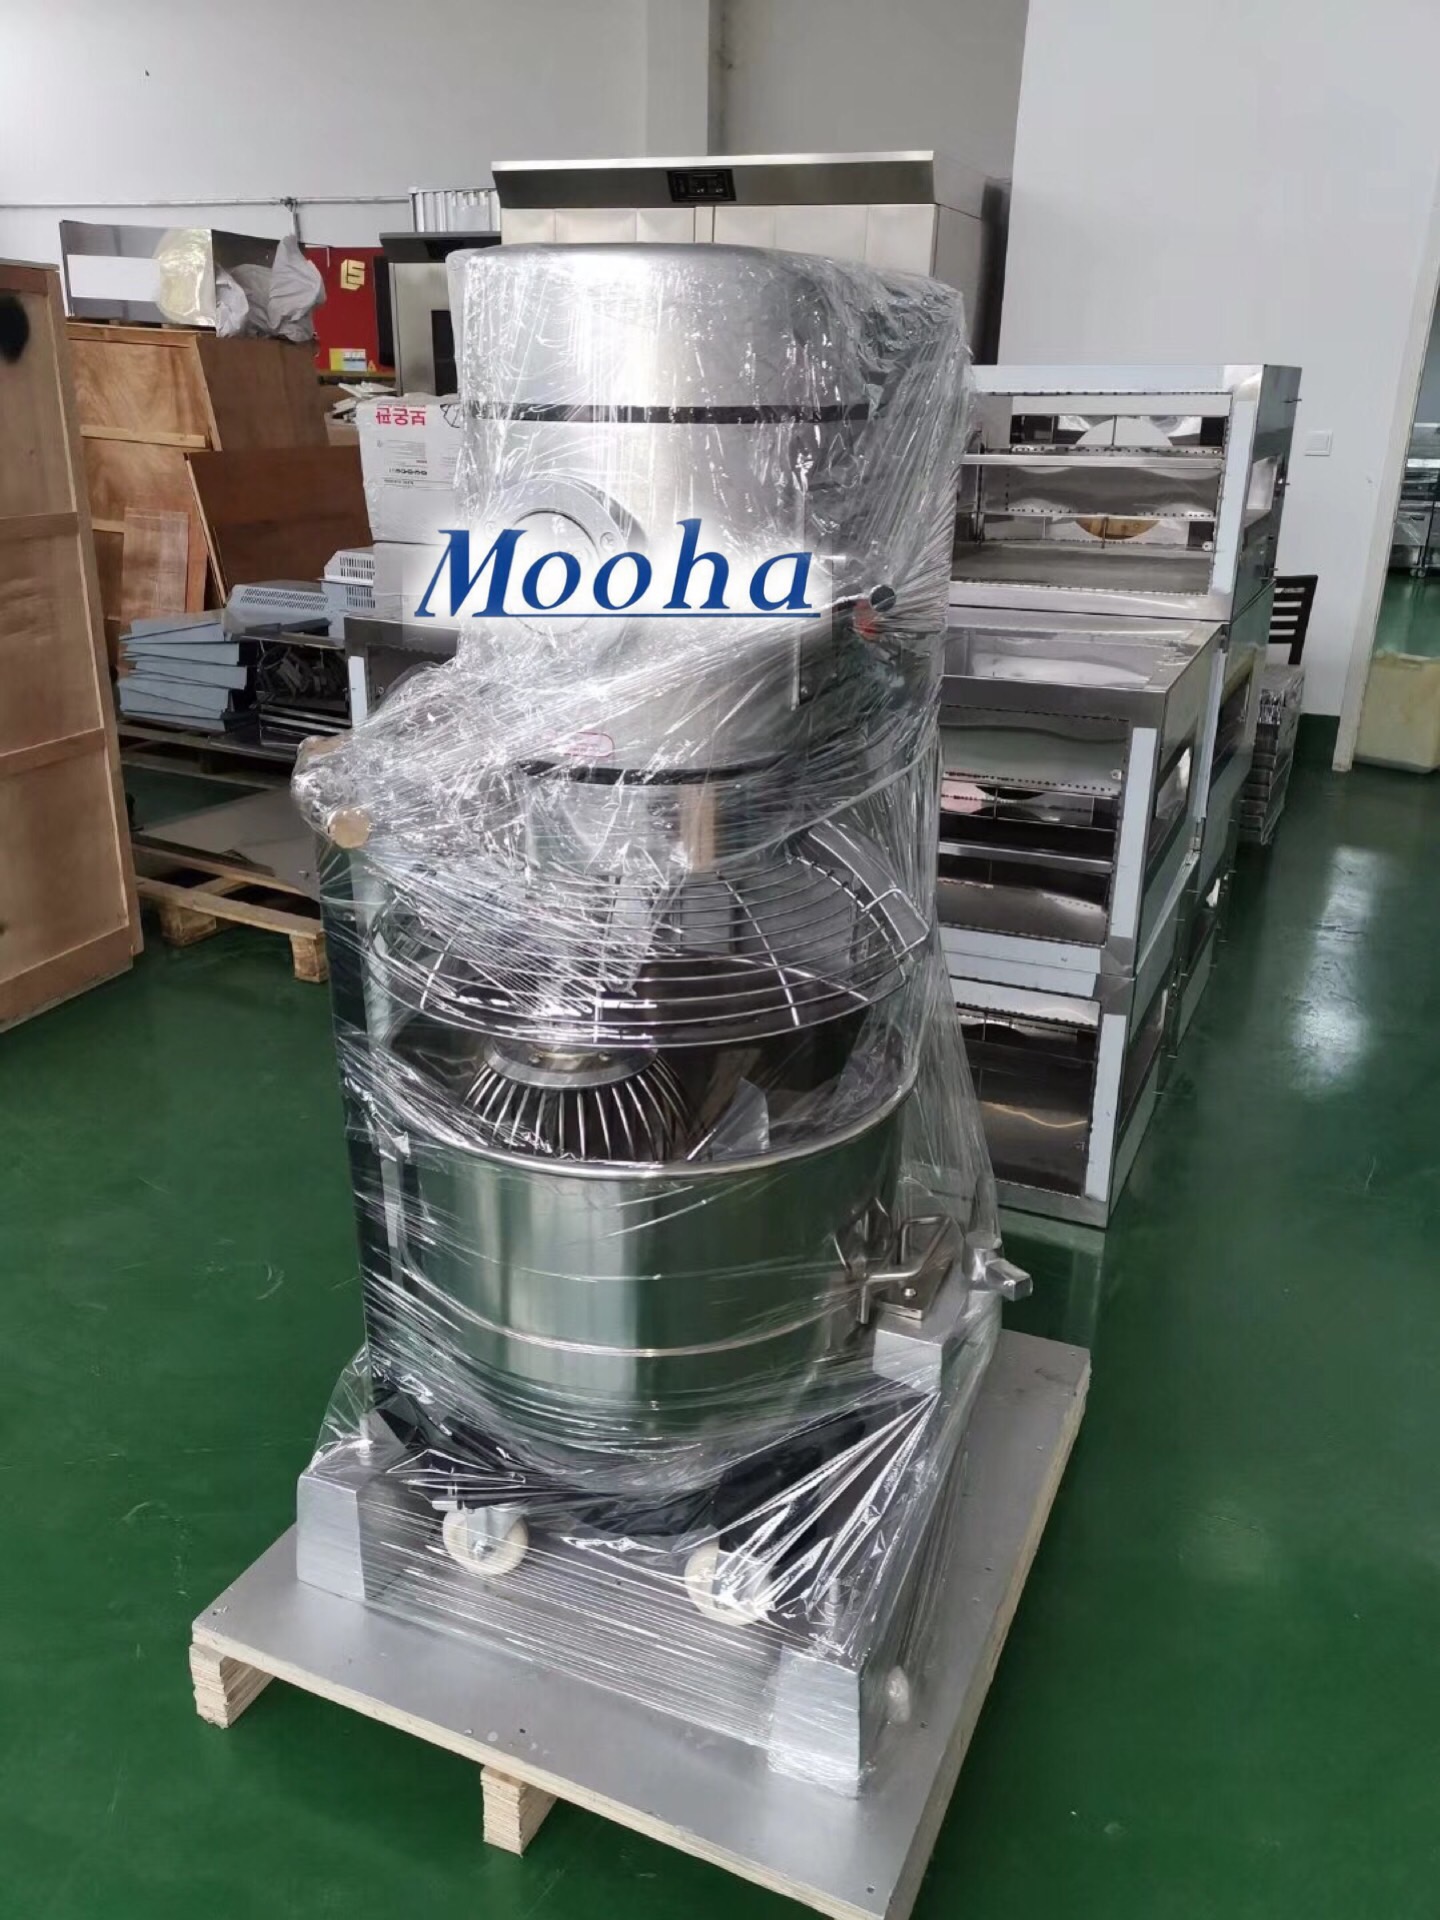 Commercial 60 Liters Planetary Mixer High Quality 8-12 KG powder Kneading Cake Biscuits Cookies Cream Egg Butter Dough Mixing Bakery Machine